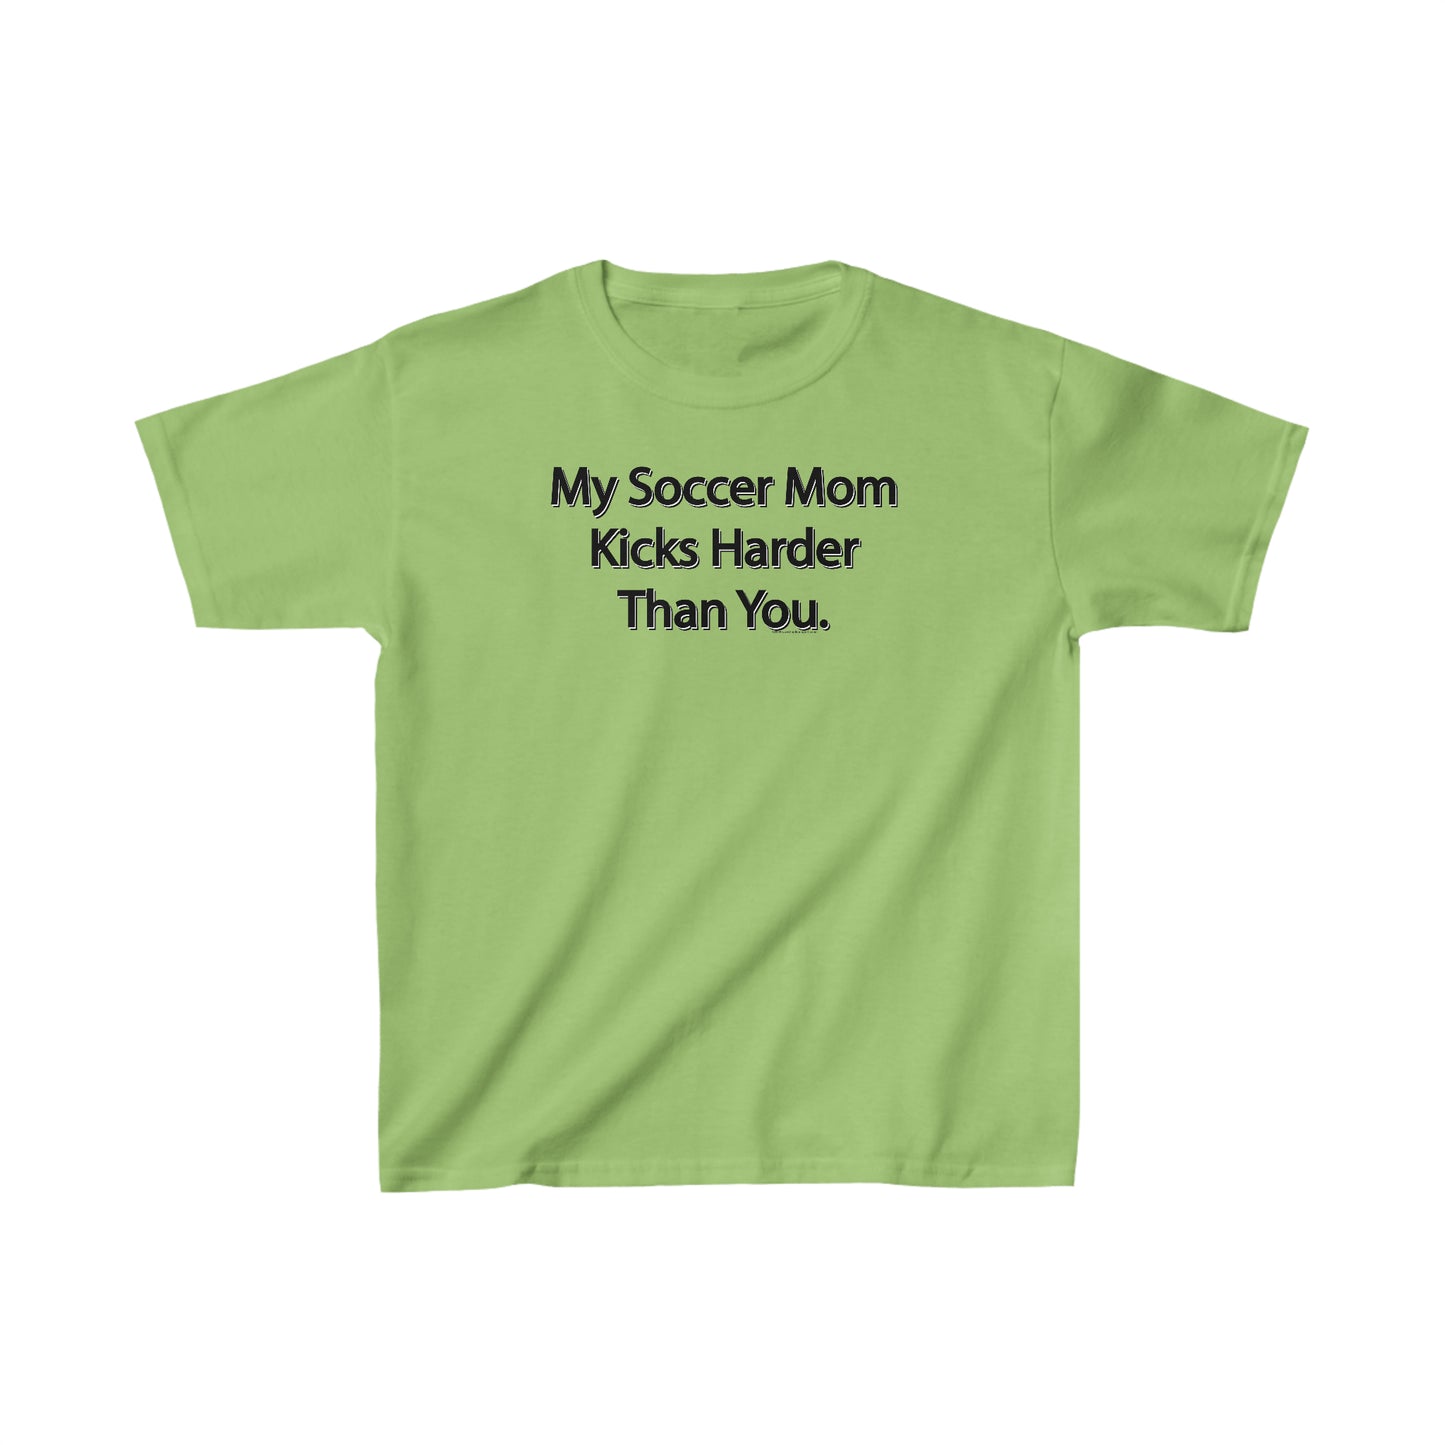 My Soccer Mom Kicks Harder Than You Soccer T-Shirt, Funny Soccer Tee Gift, Soccer Attitude, Soccer players and Fans of Soccer